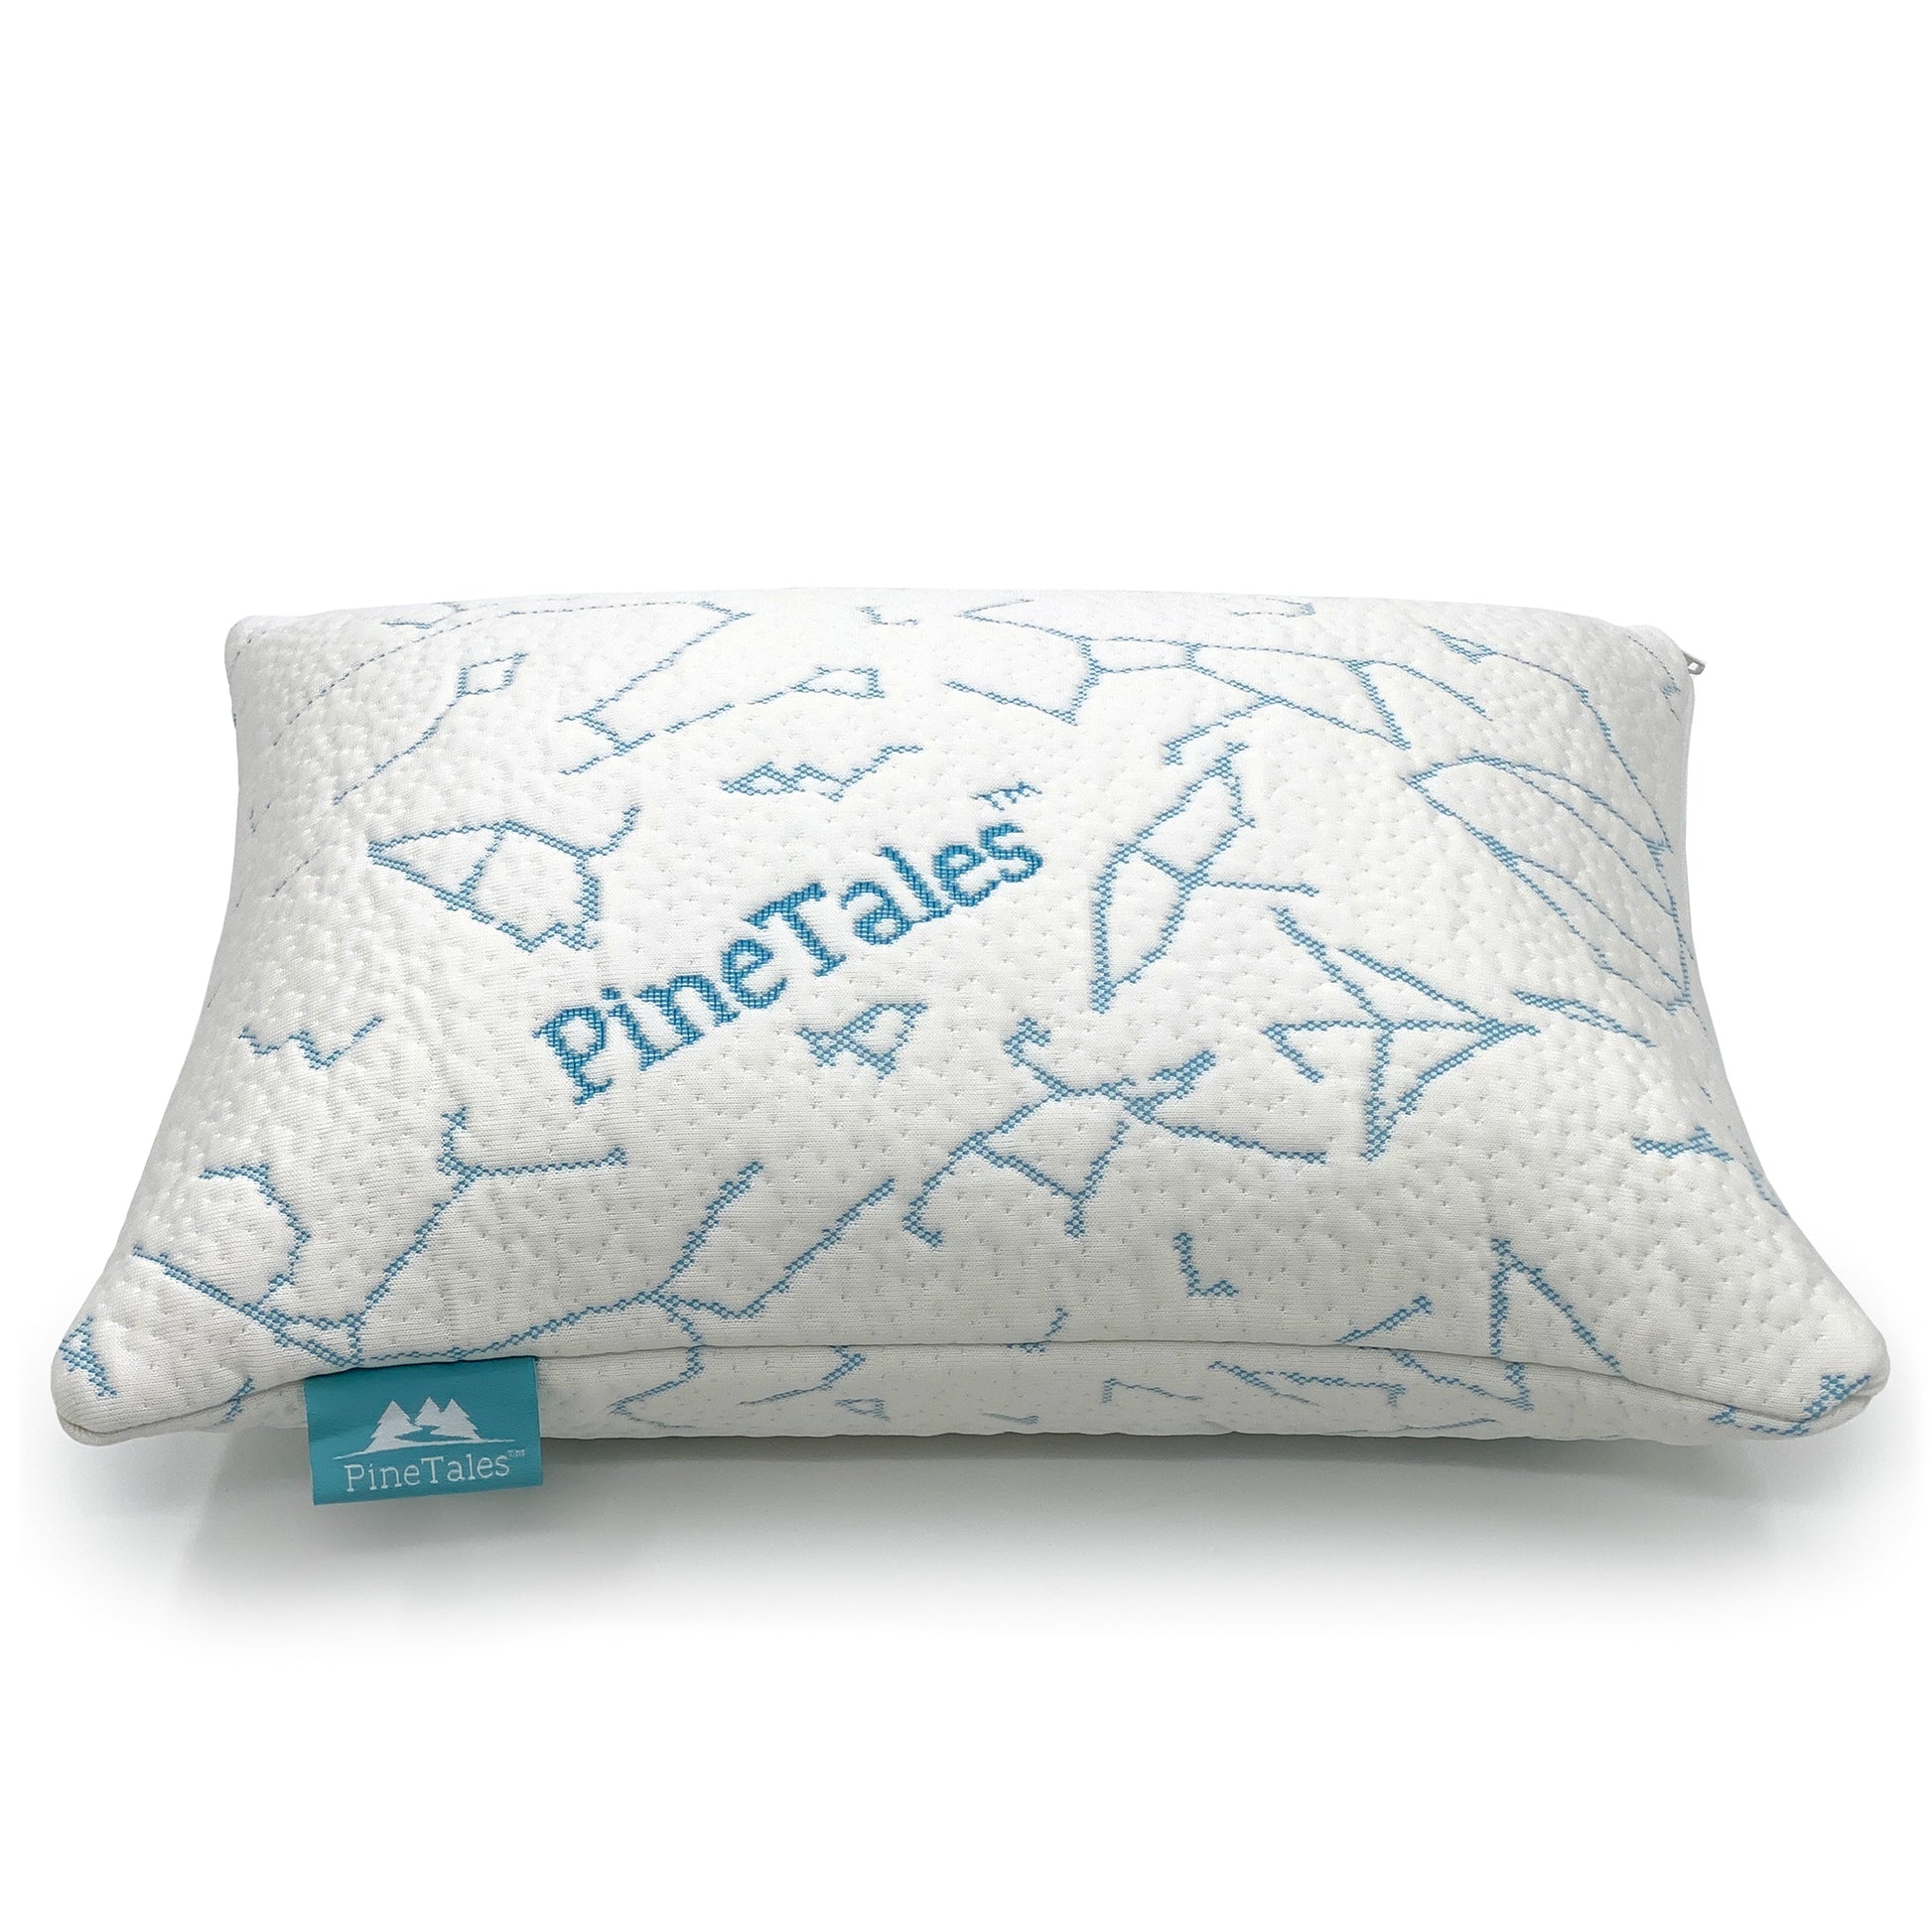 Car Kids Travel Sleeping Pillows for Children on Road Trips Provides Head  and Body Support Cushion on Car Long Journeys